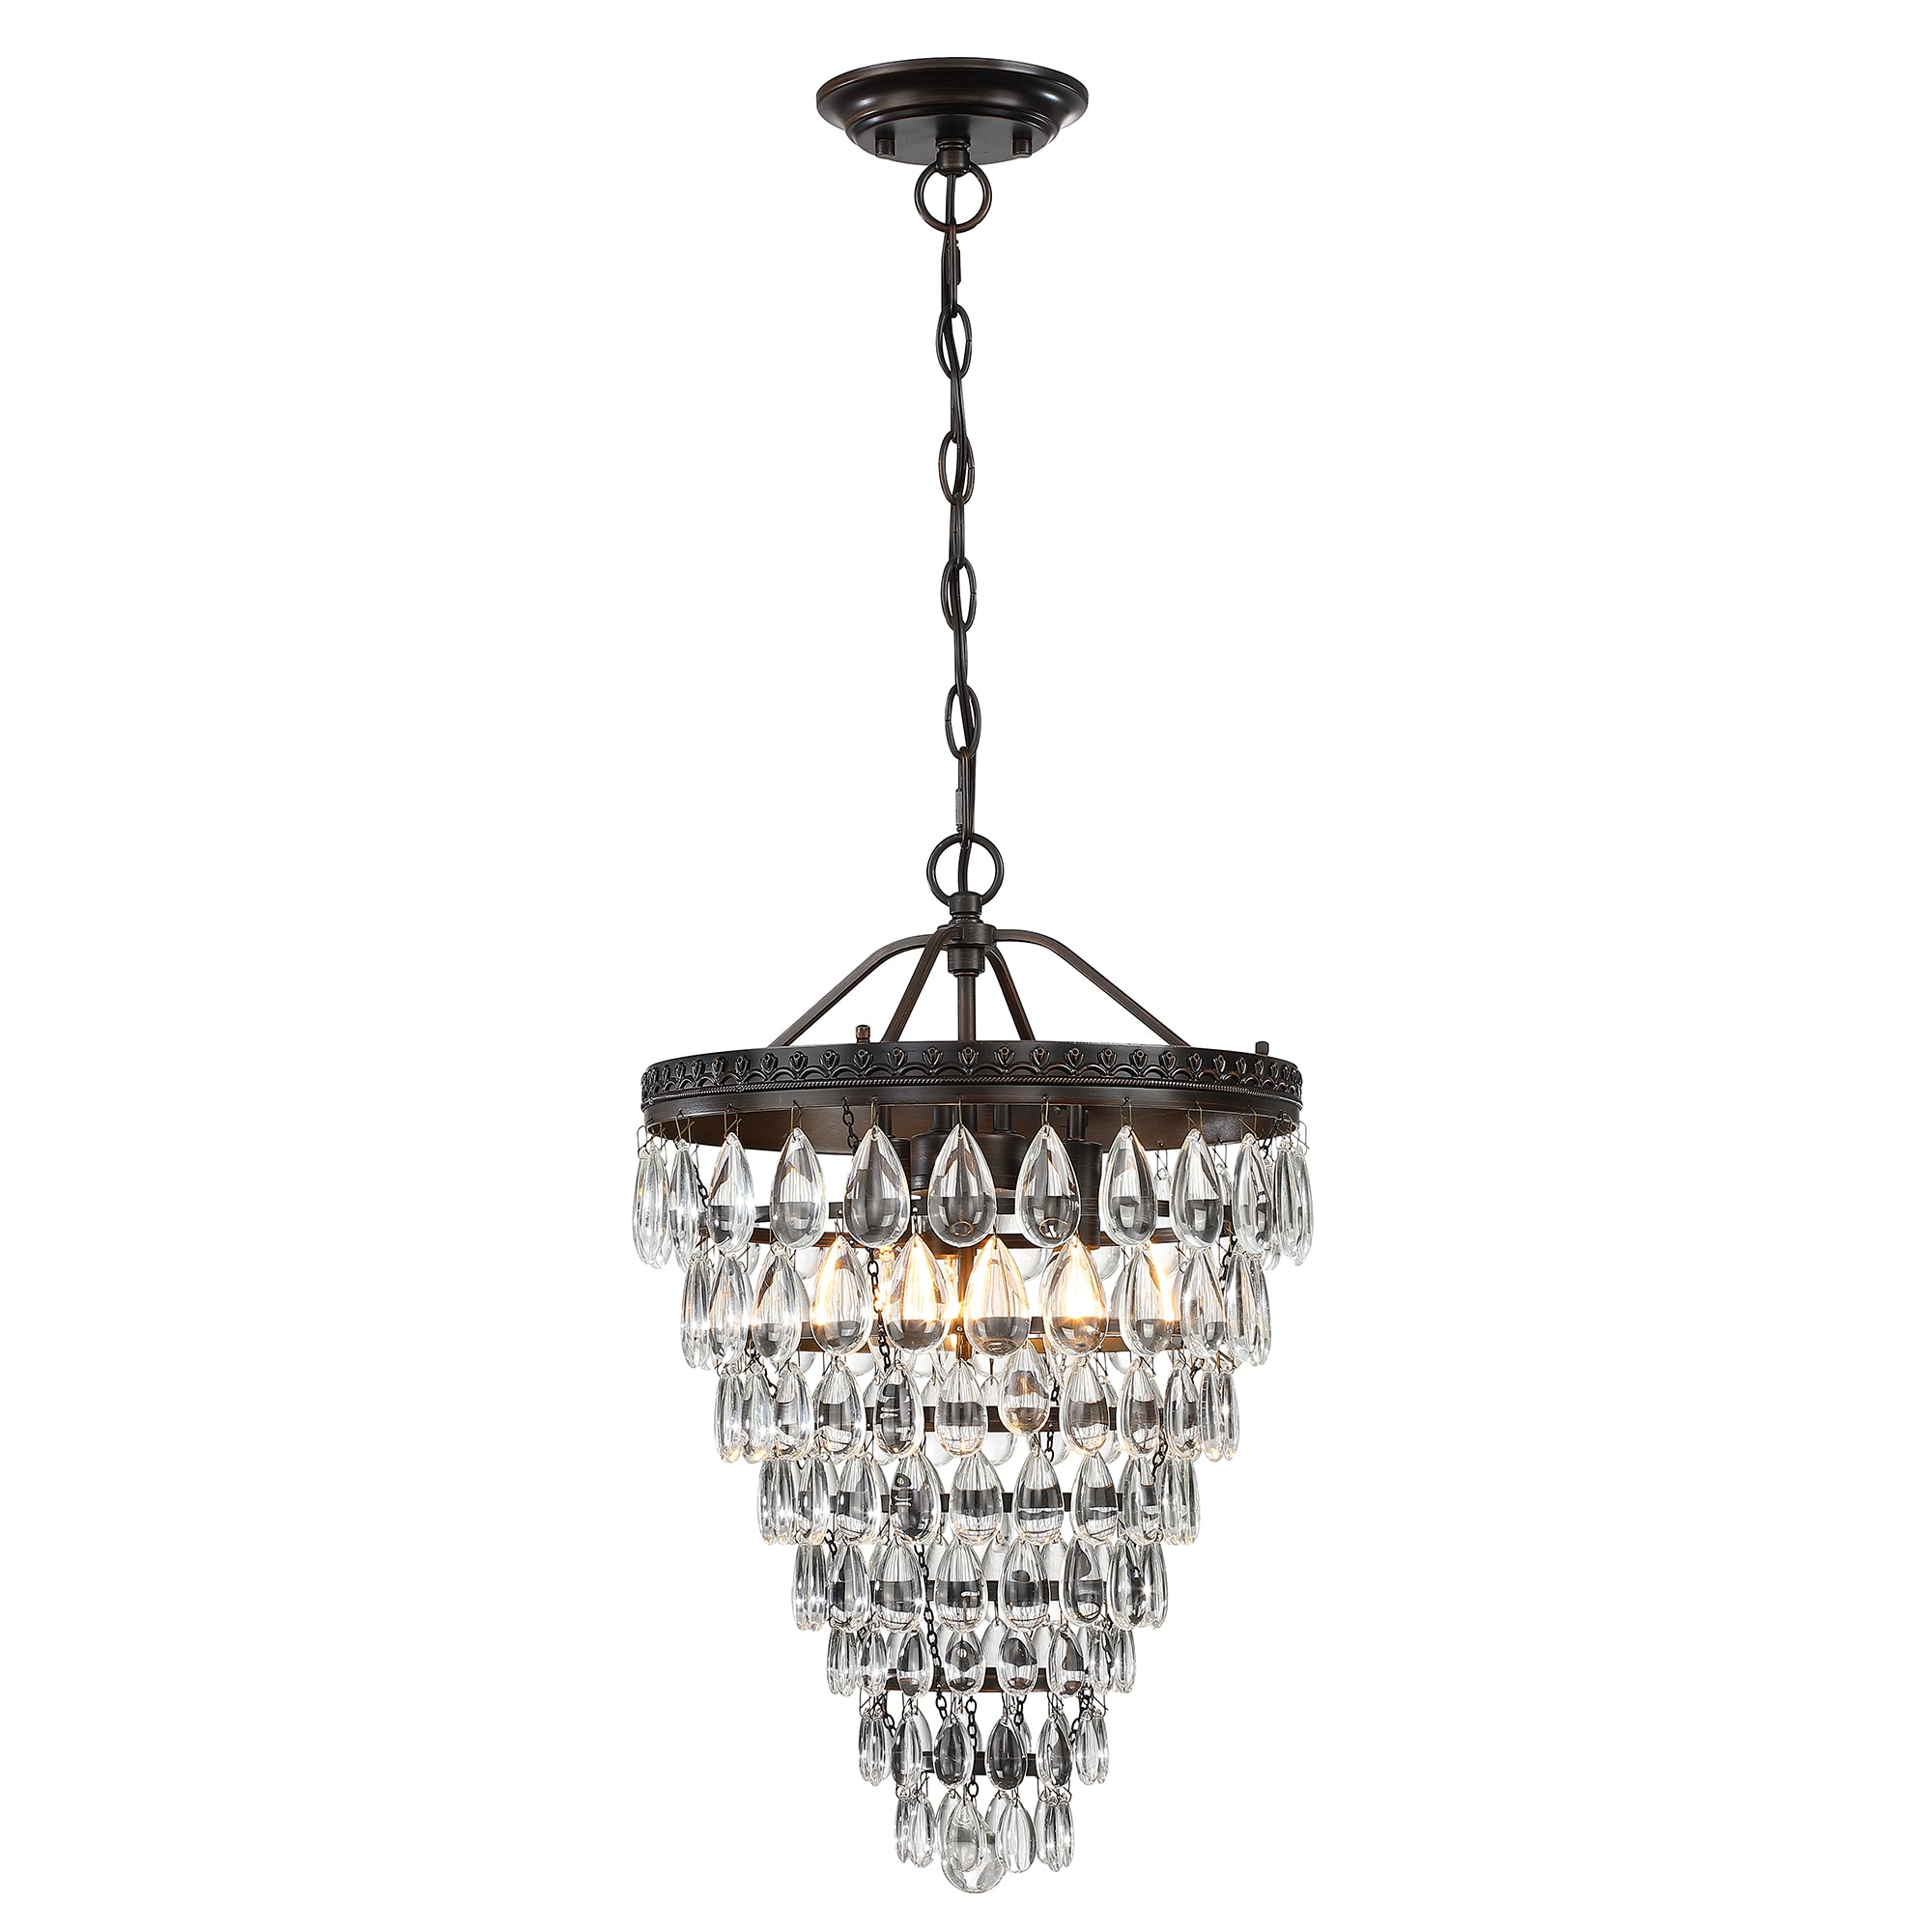 WELLFOR TC Chandelier 3-Light Oil-Rubbed Bronze Modern/Contemporary Dry ...